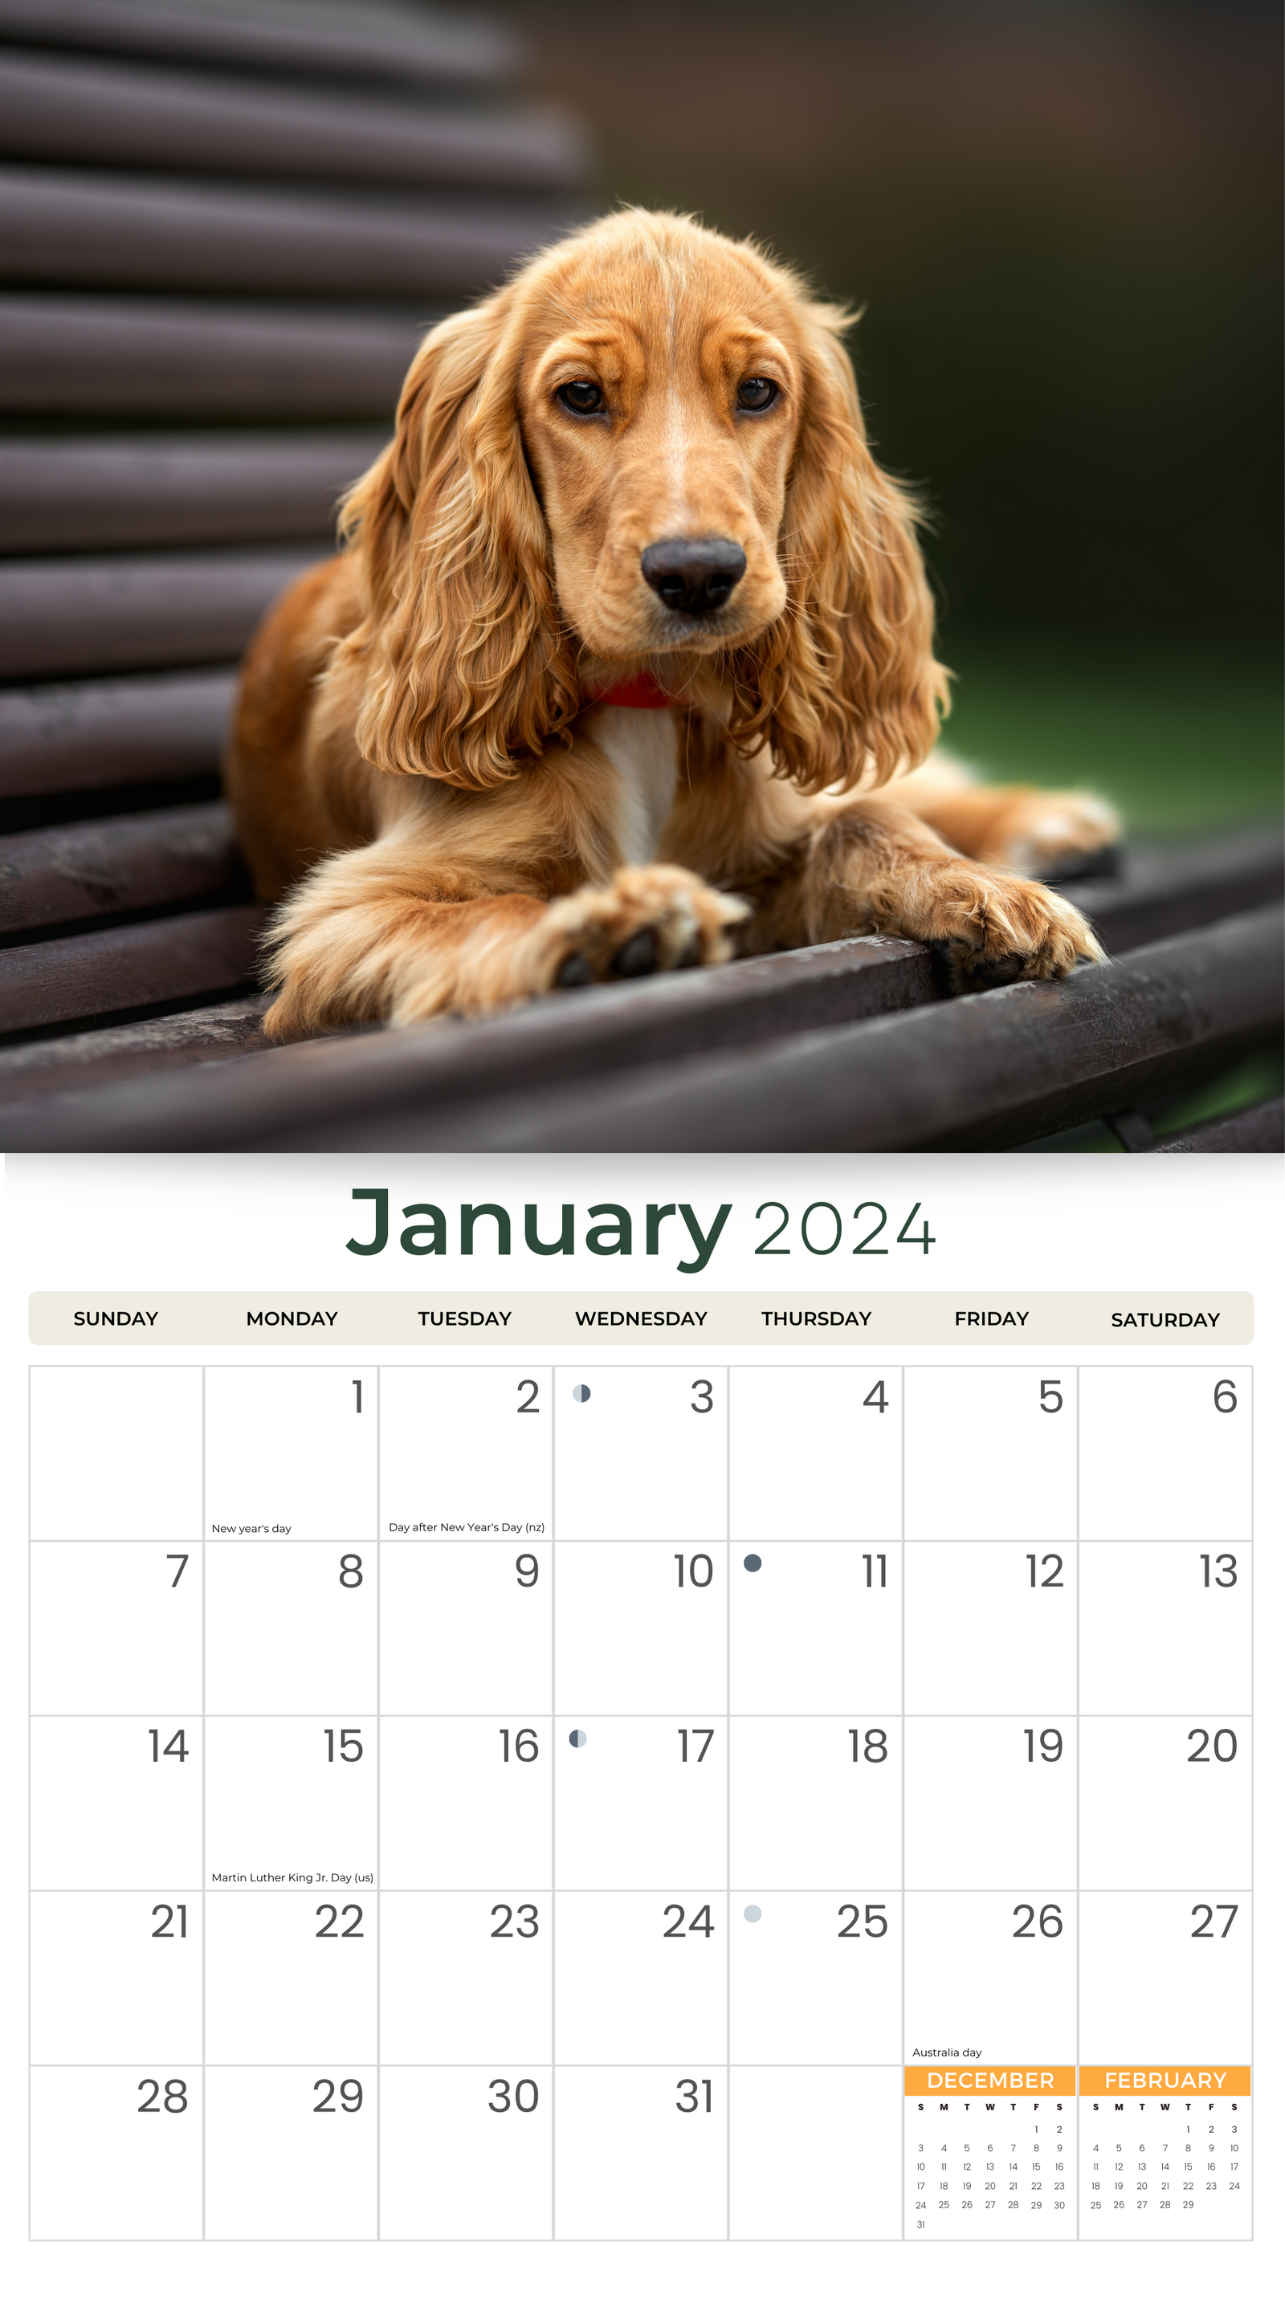 2024 English Cocker Spaniels Dogs & Puppies - Deluxe Wall Calendar by Just Calendars - 16 Month - Plastic Free